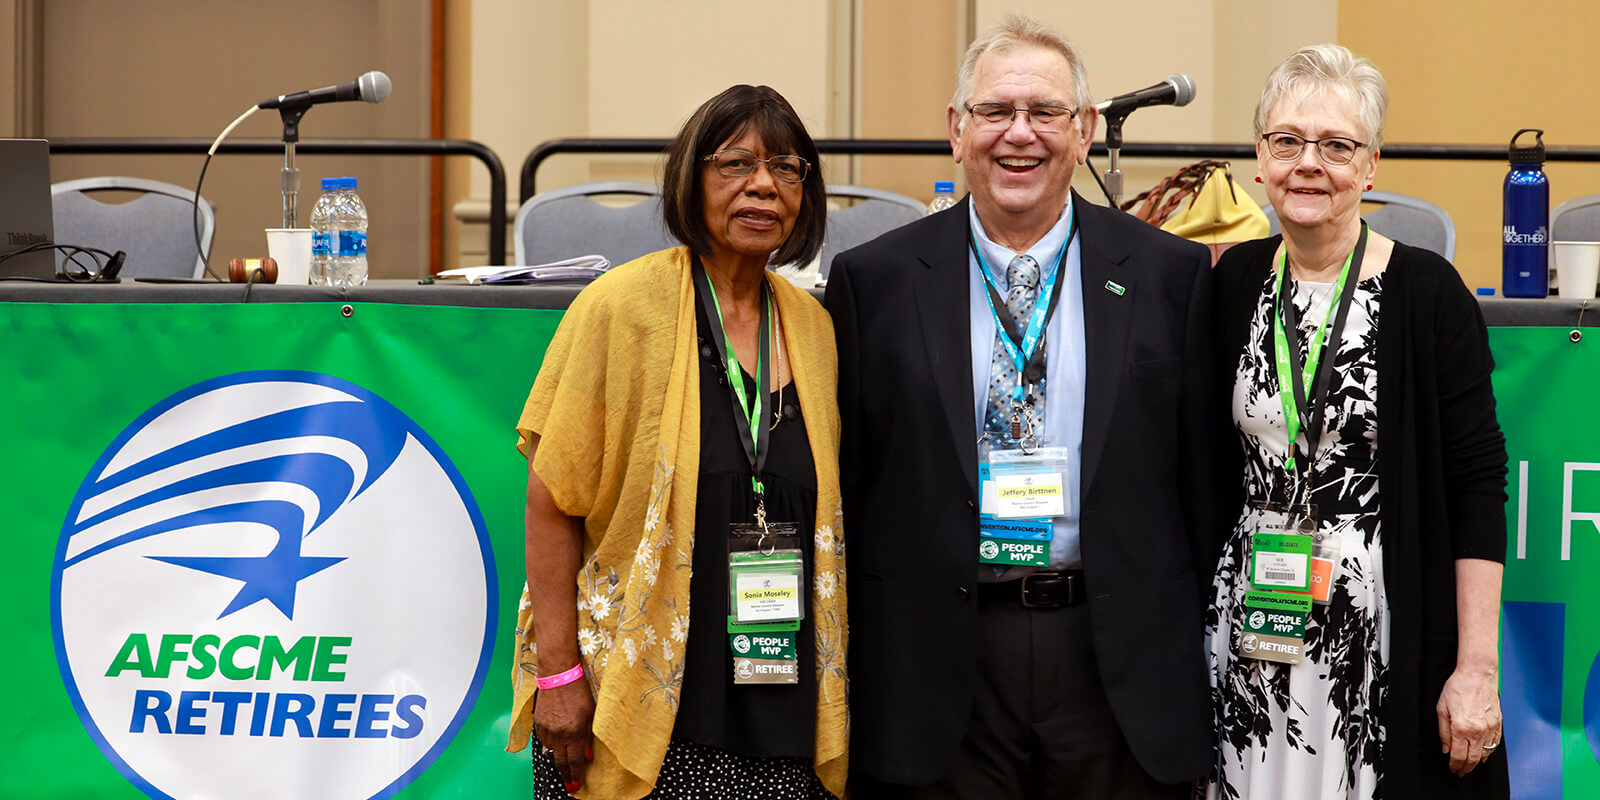 All together again, AFSCME Retirees are charged up